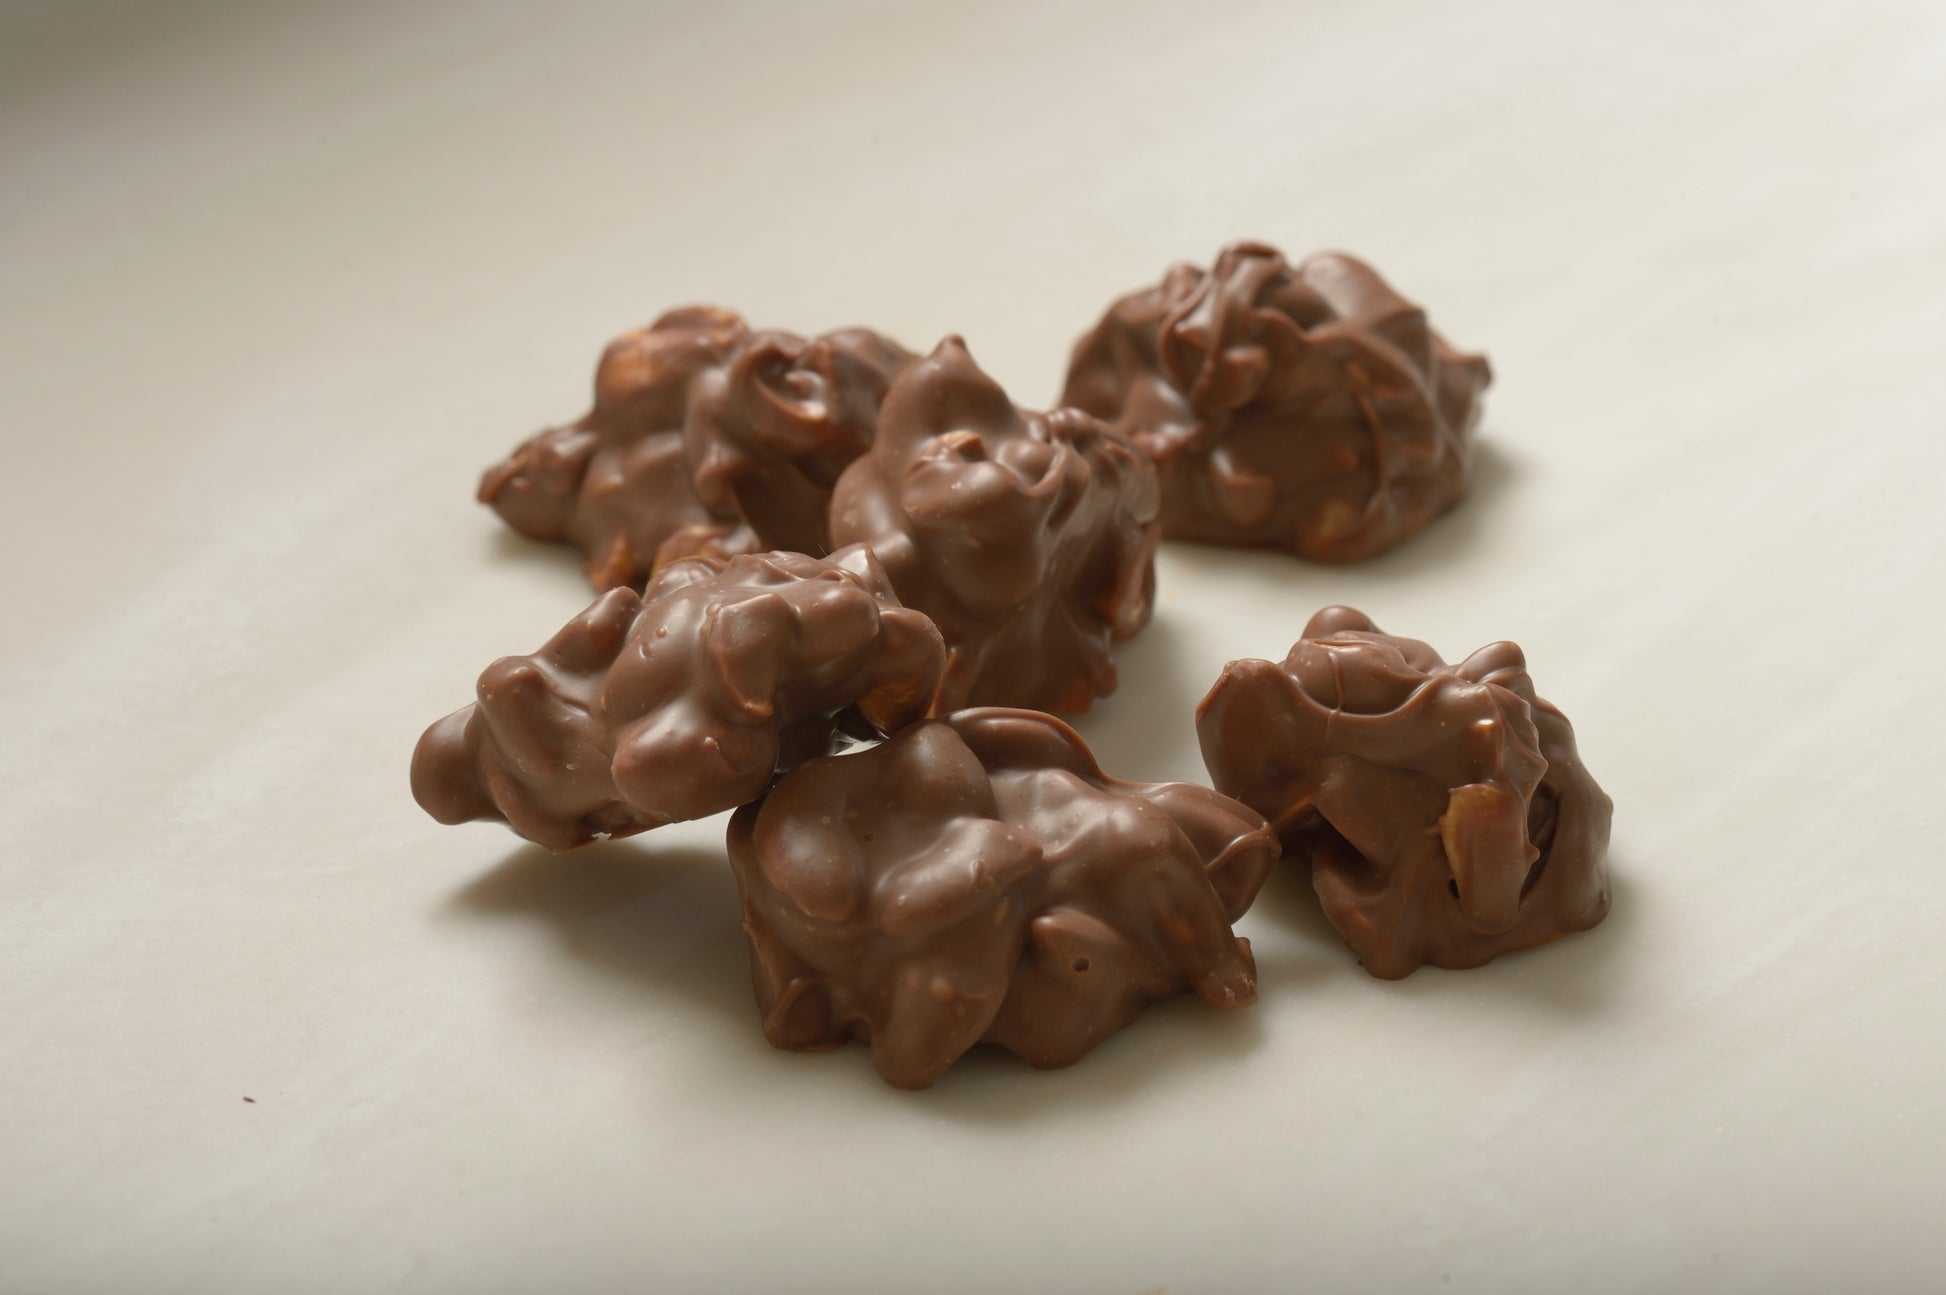 Sugar-Free Milk Chocolate Cashew Clusters - Handcrafted treats with lightly salted cashew pieces, perfect for guilt-free snacking!